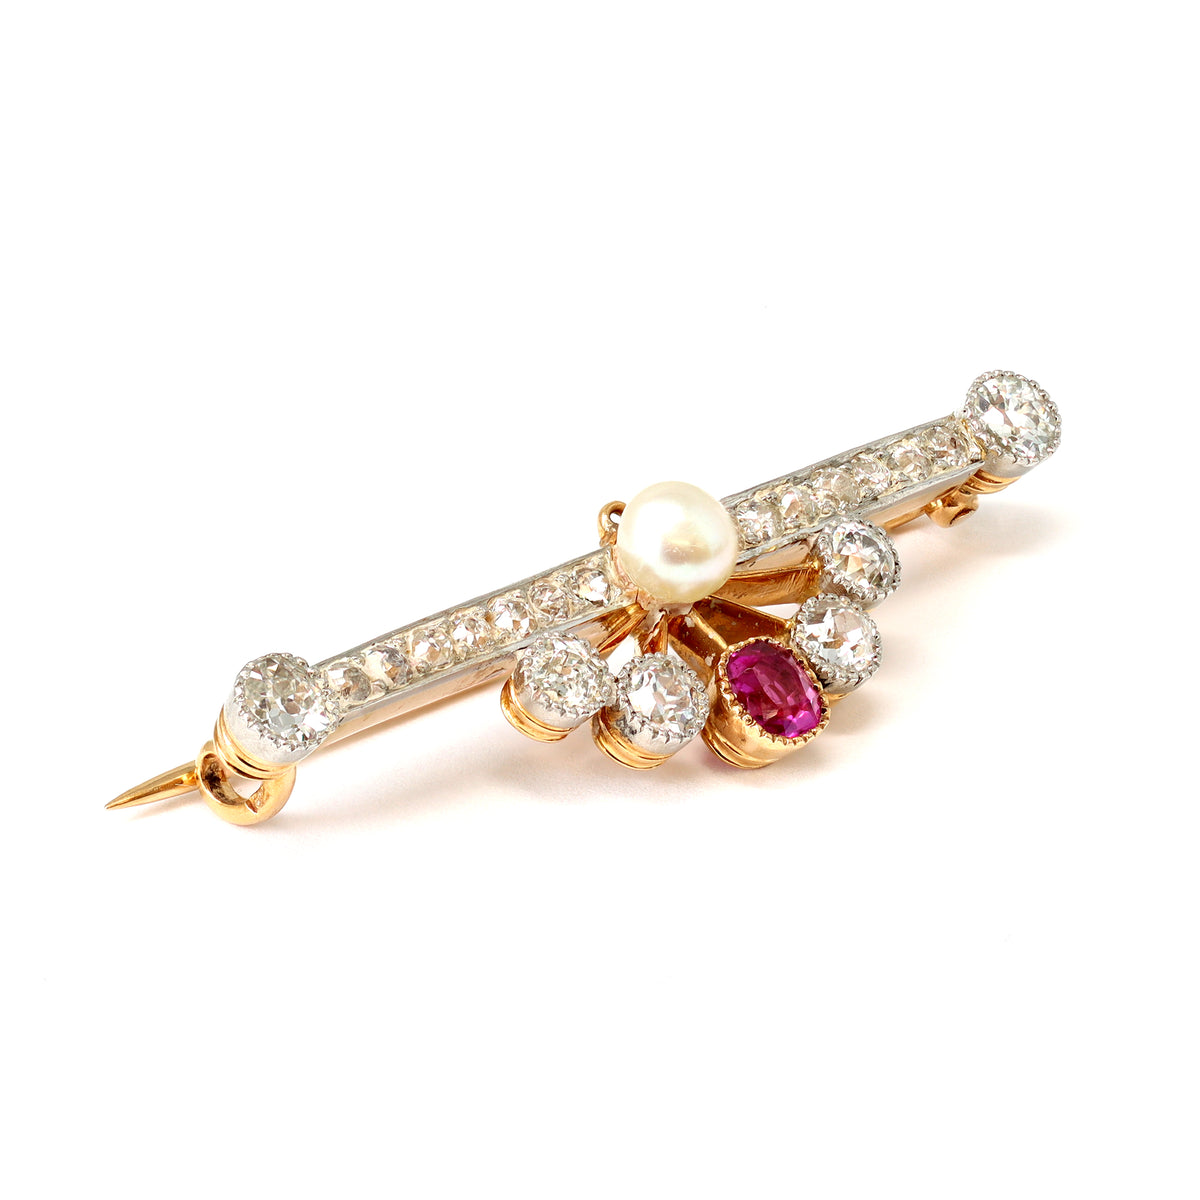 Victorian-14-karat-yellow-gold-diamond-ruby-and-pearl-brooch-angle-view-2000x2000